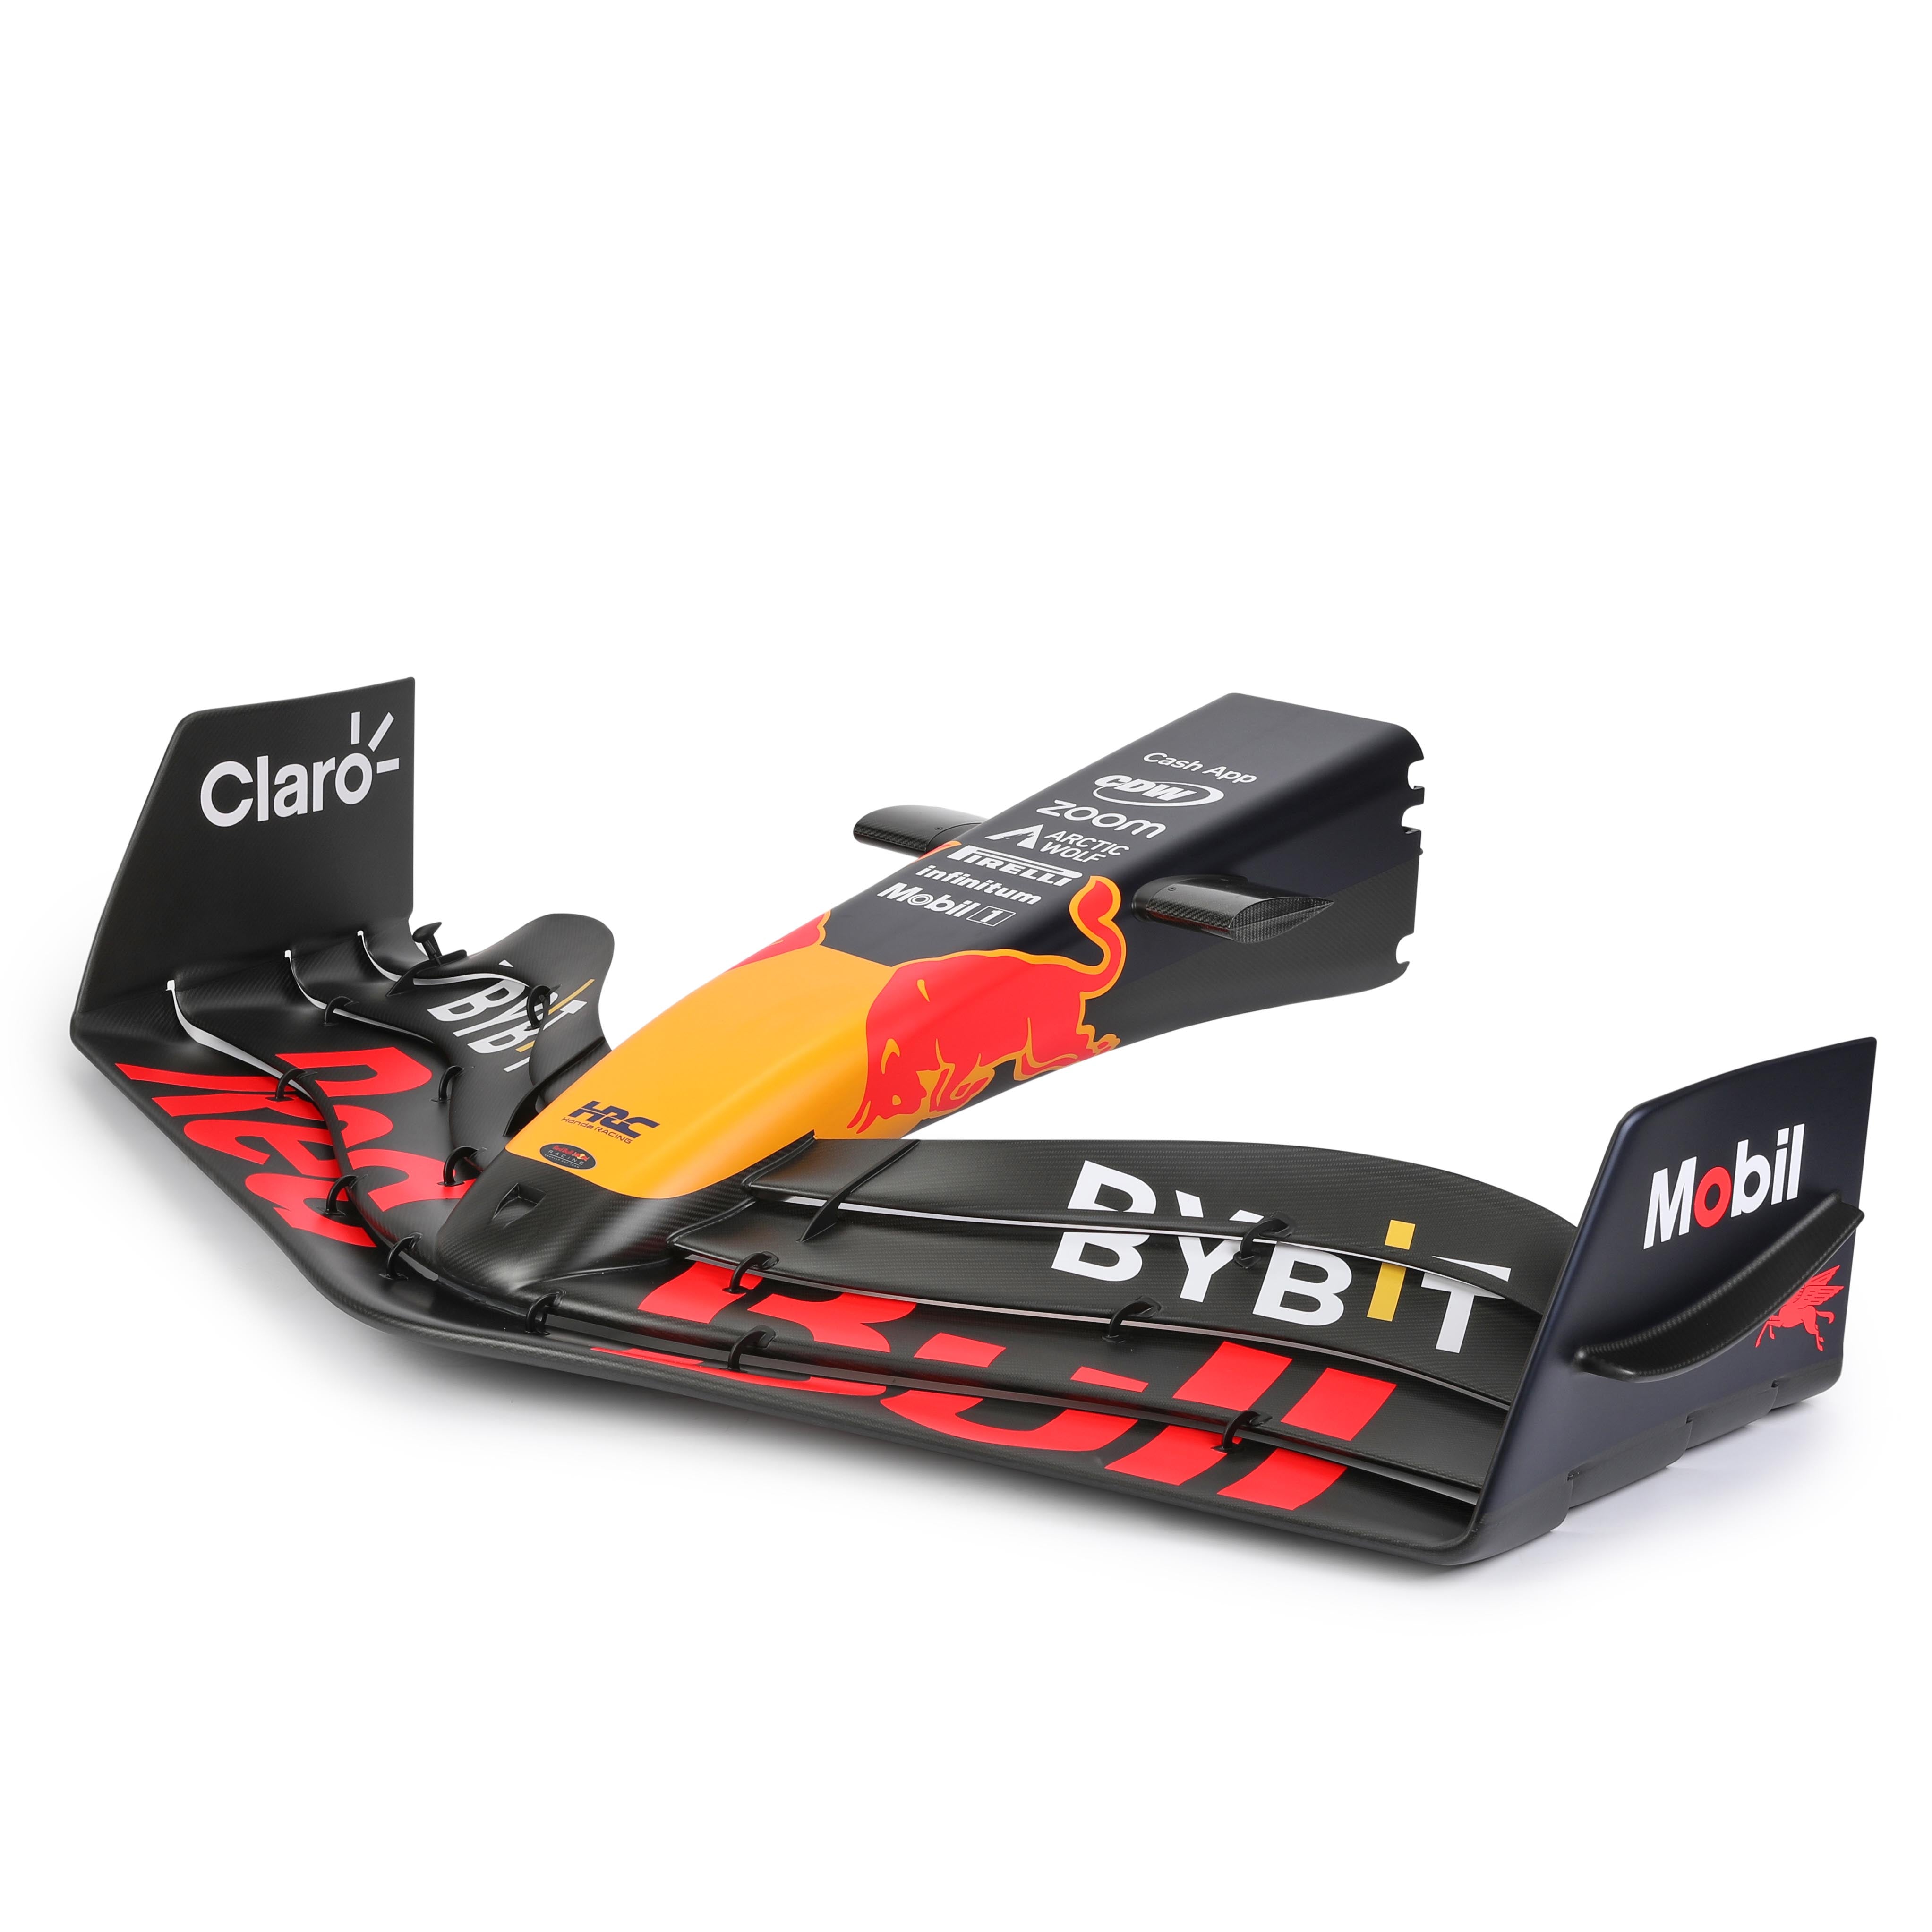 Oracle Red Bull 2023 RB19 Replica Nosecone & Wing